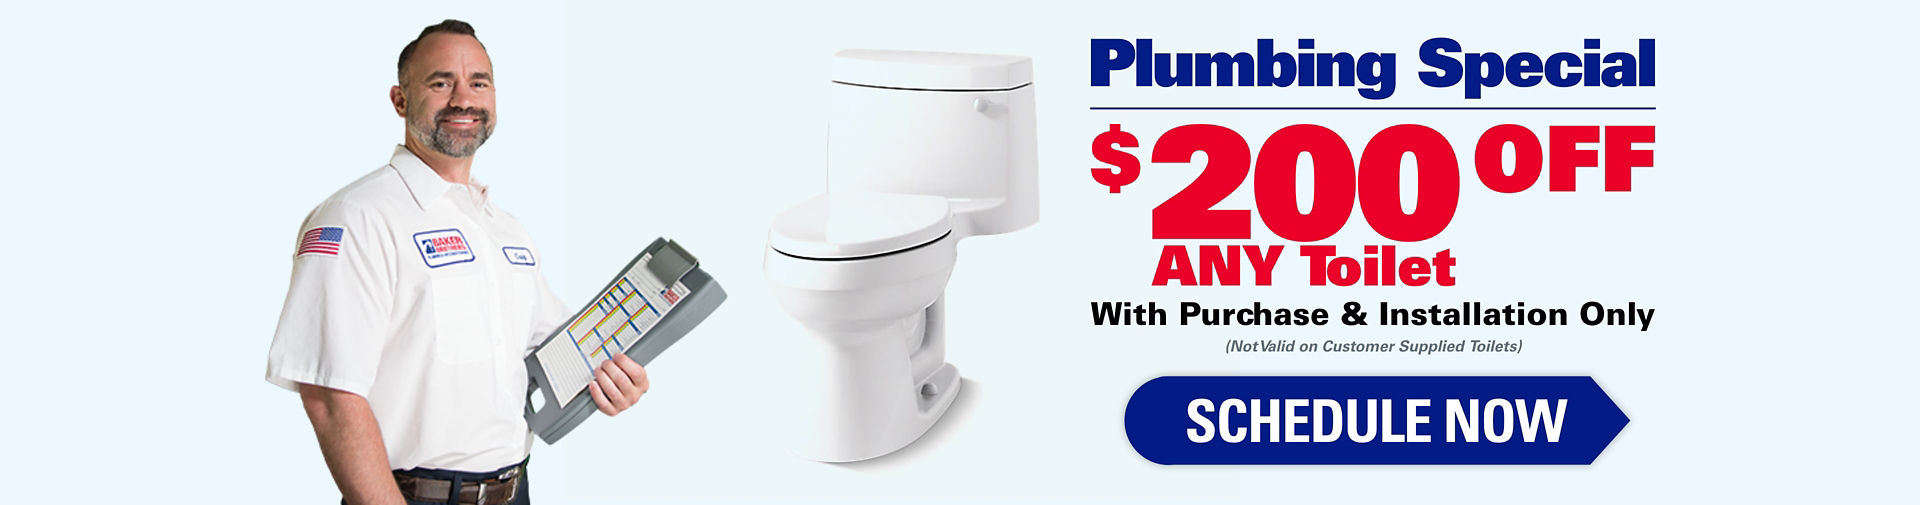 Get $200 Off Any Toilet